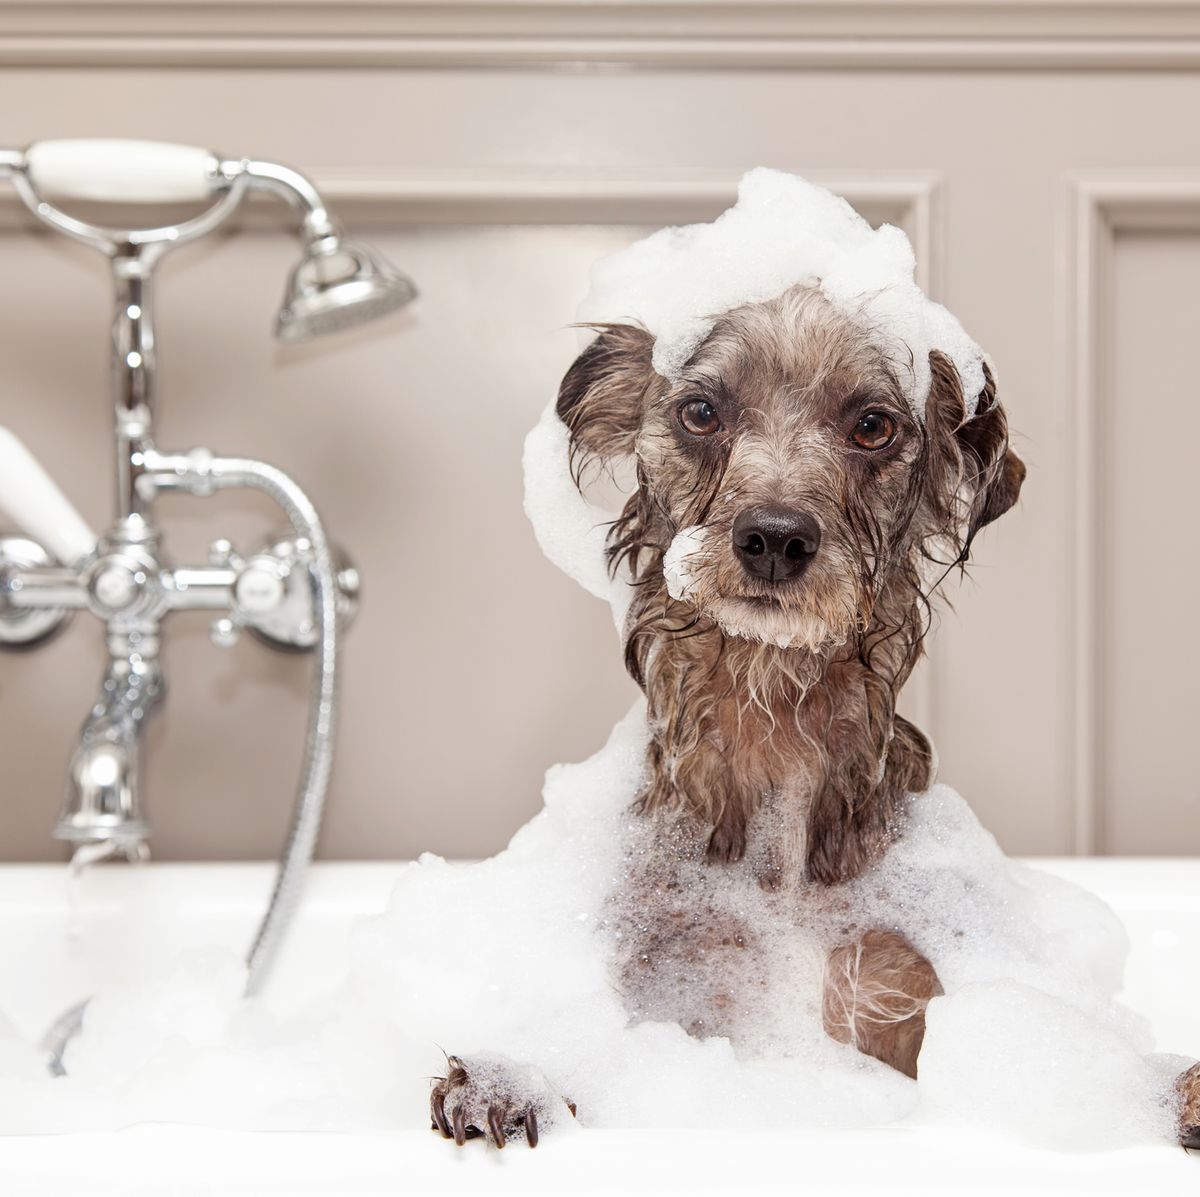 How to Safely Take a Dog or Cat's Temperature at Home